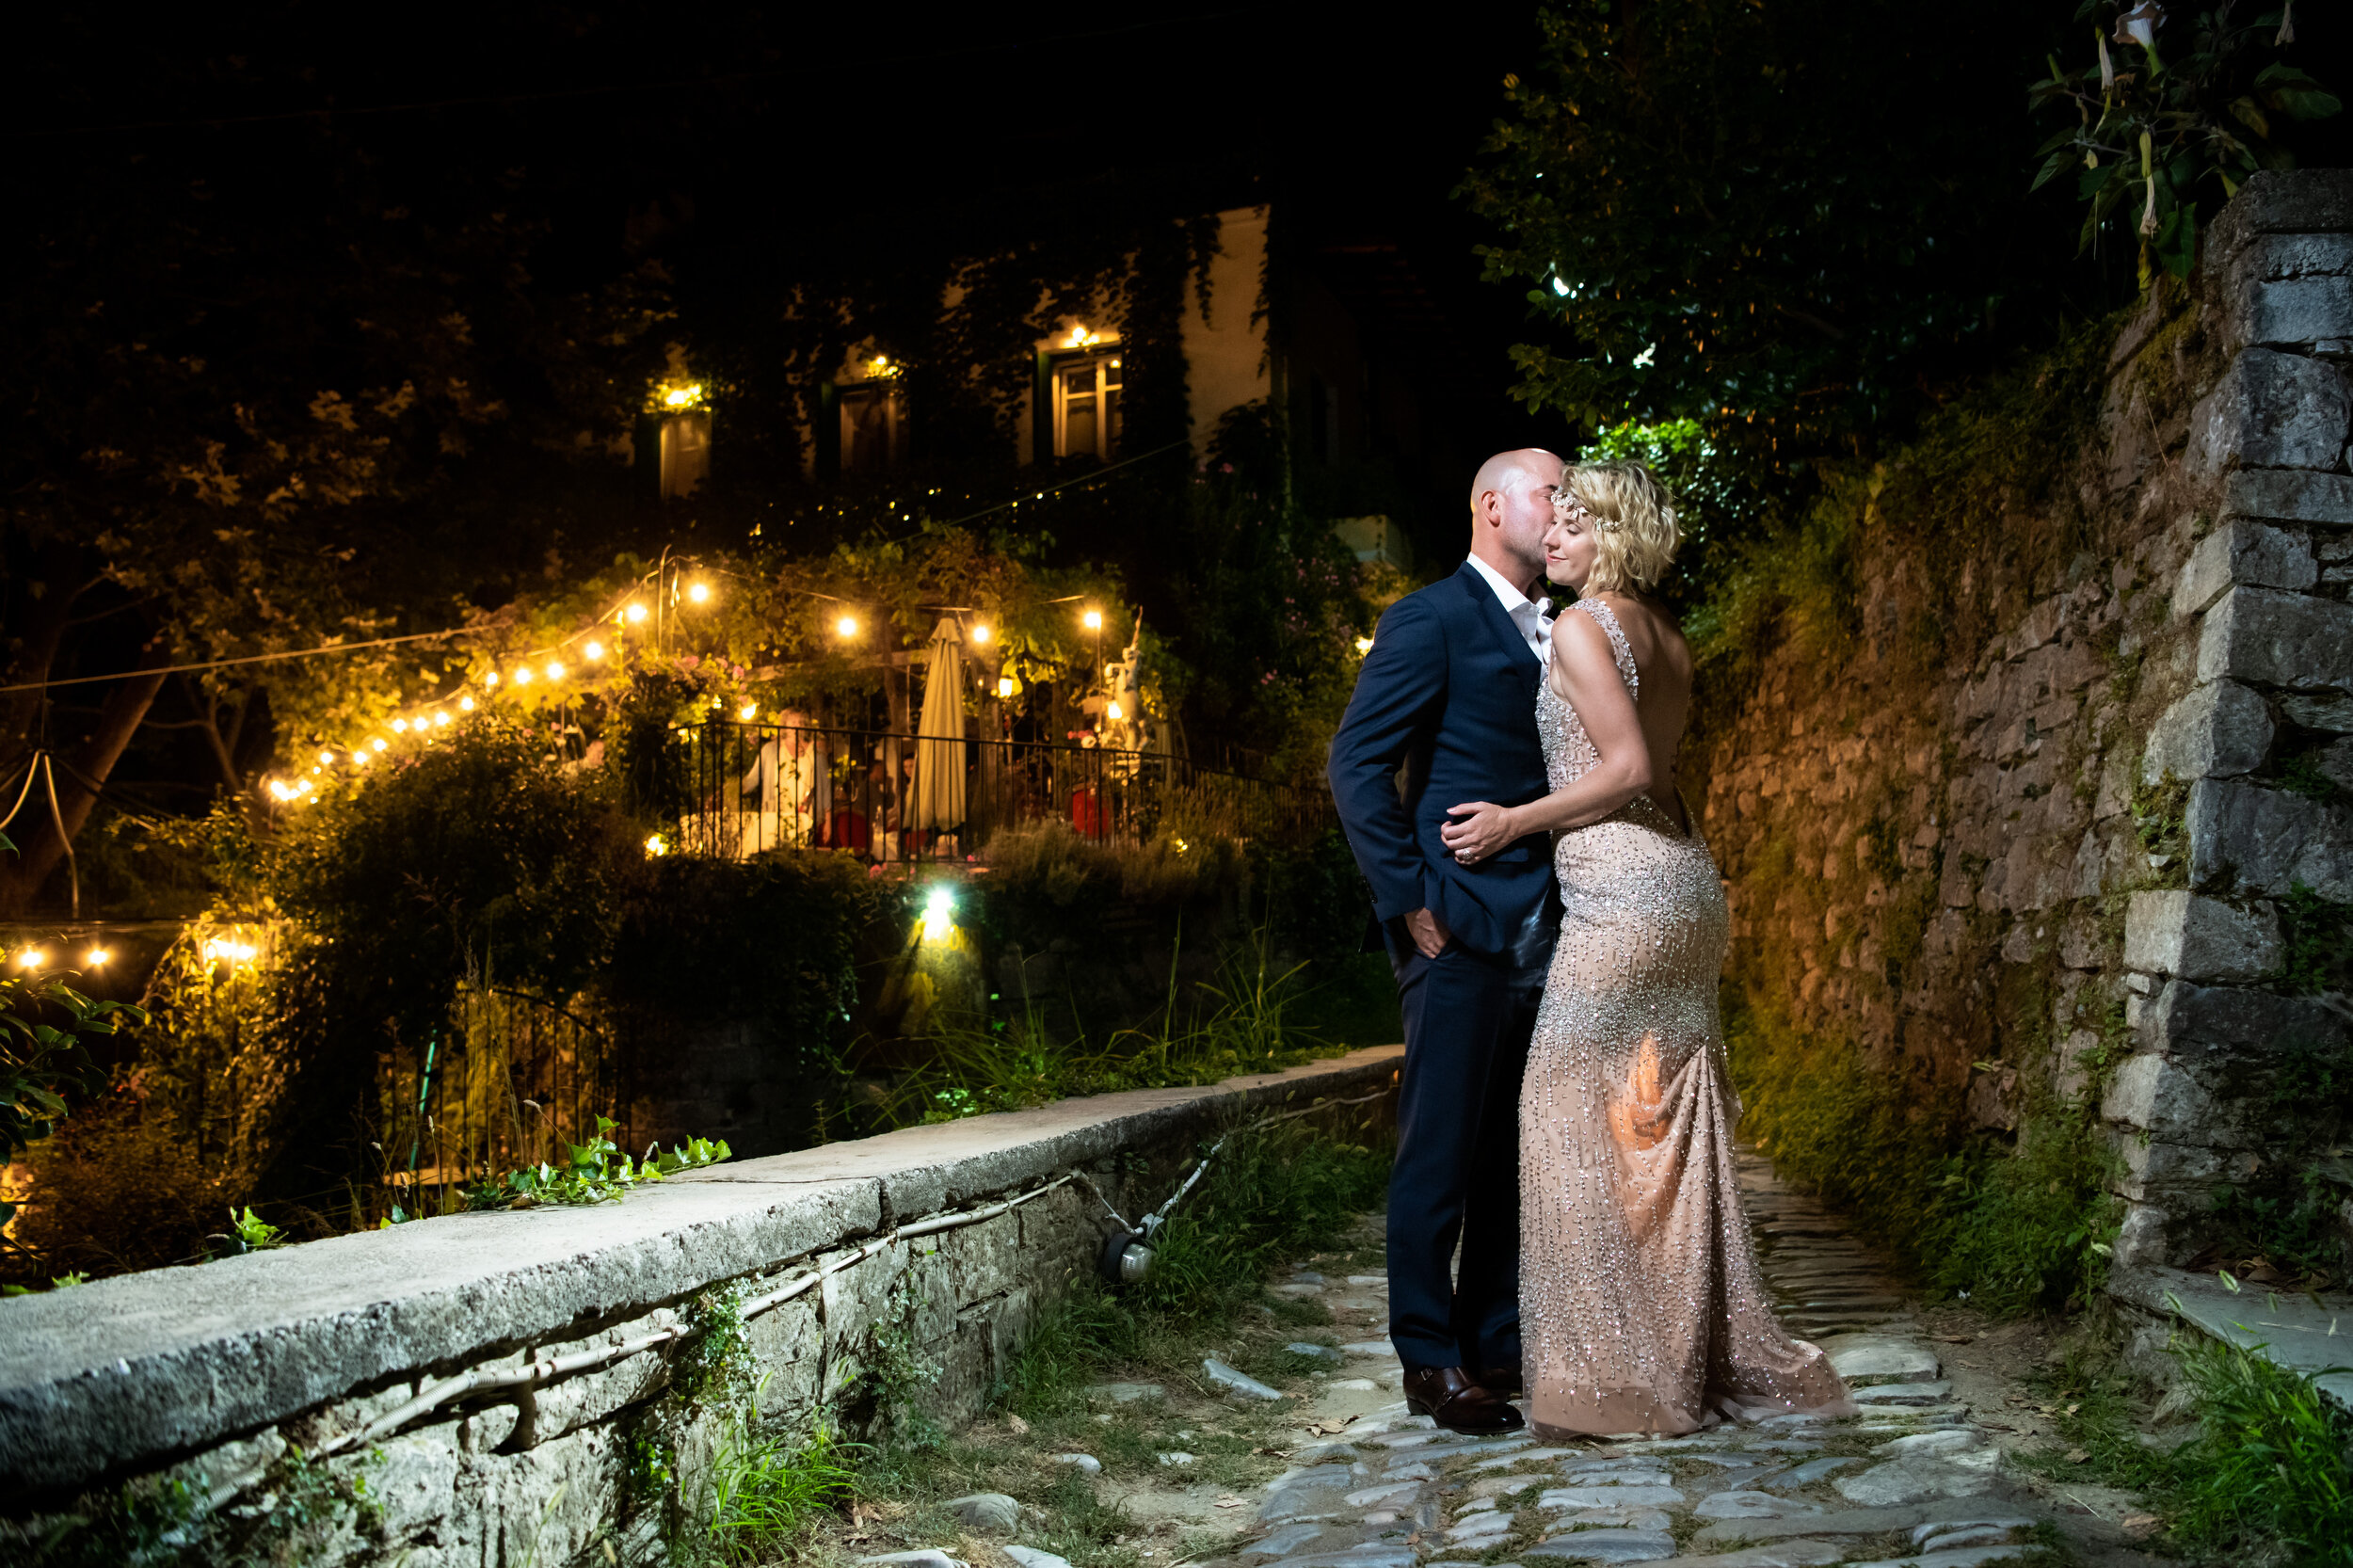 Night portrait of the bride and groom:  destination wedding photo at the Lost Unicorn Hotel, Tsagarada, Greece by J. Brown Photography.